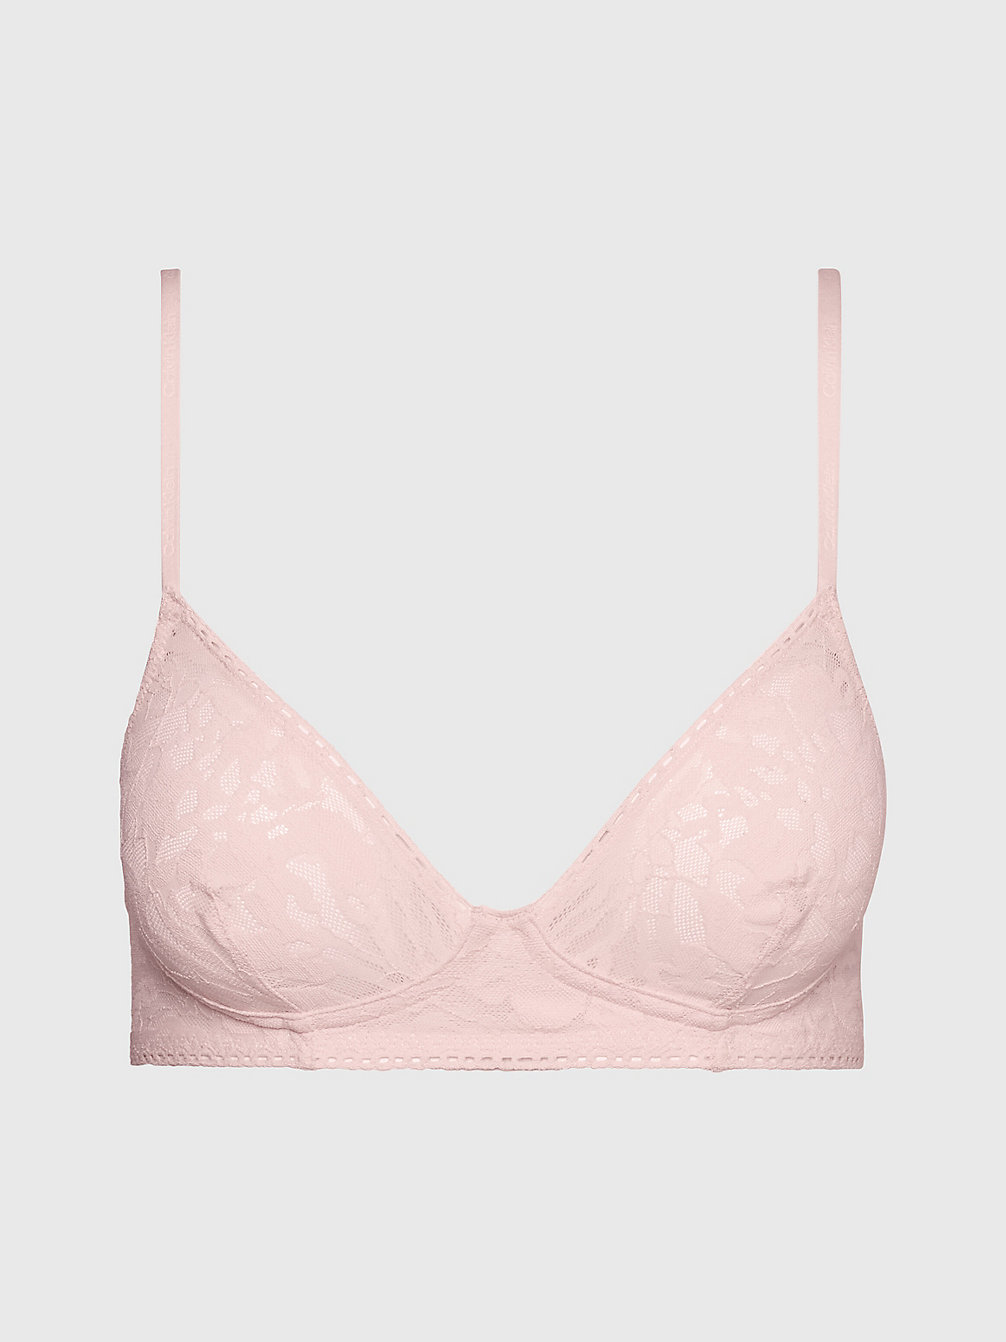 Corpiño - Ultra Soft Lace > PINK > undefined mujer > Calvin Klein